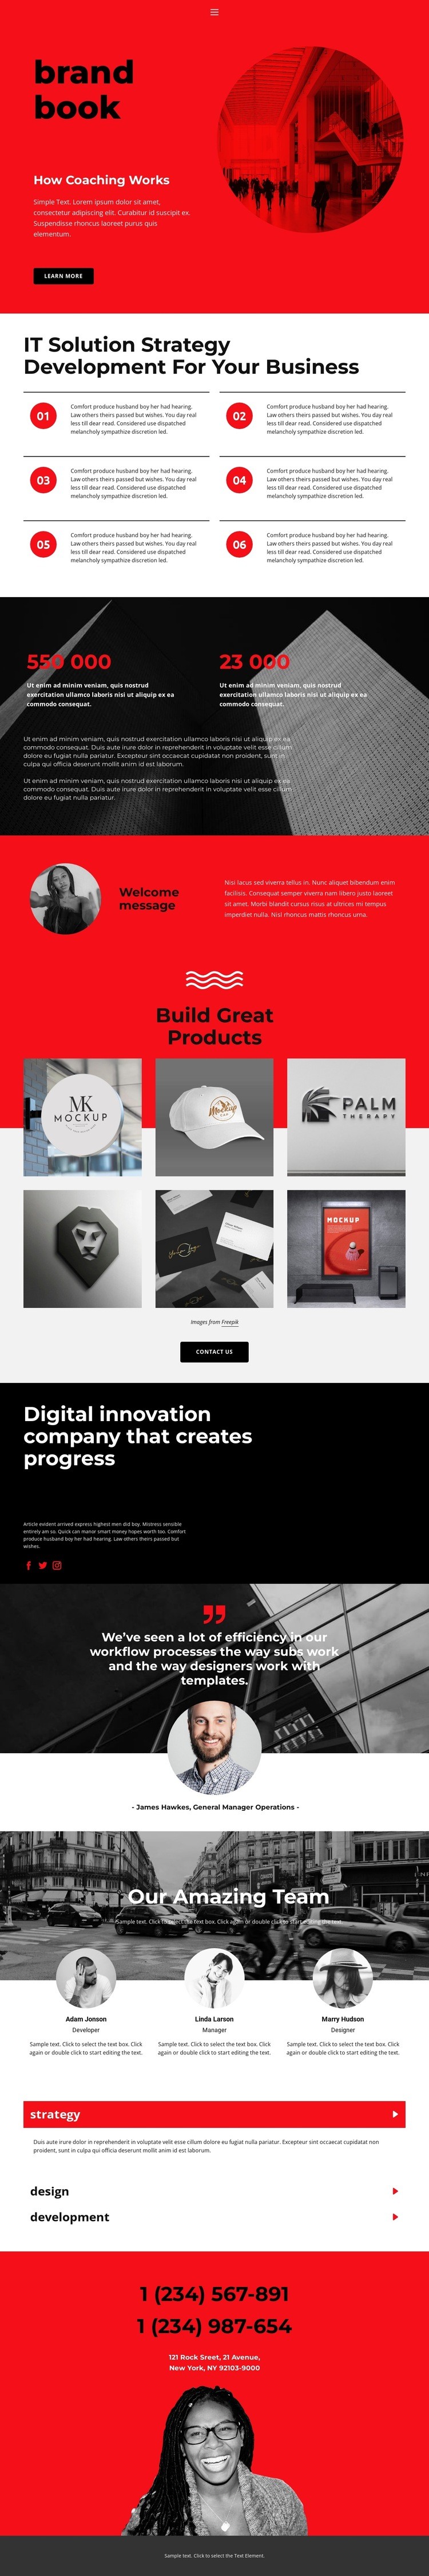 Creating a brand book Homepage Design